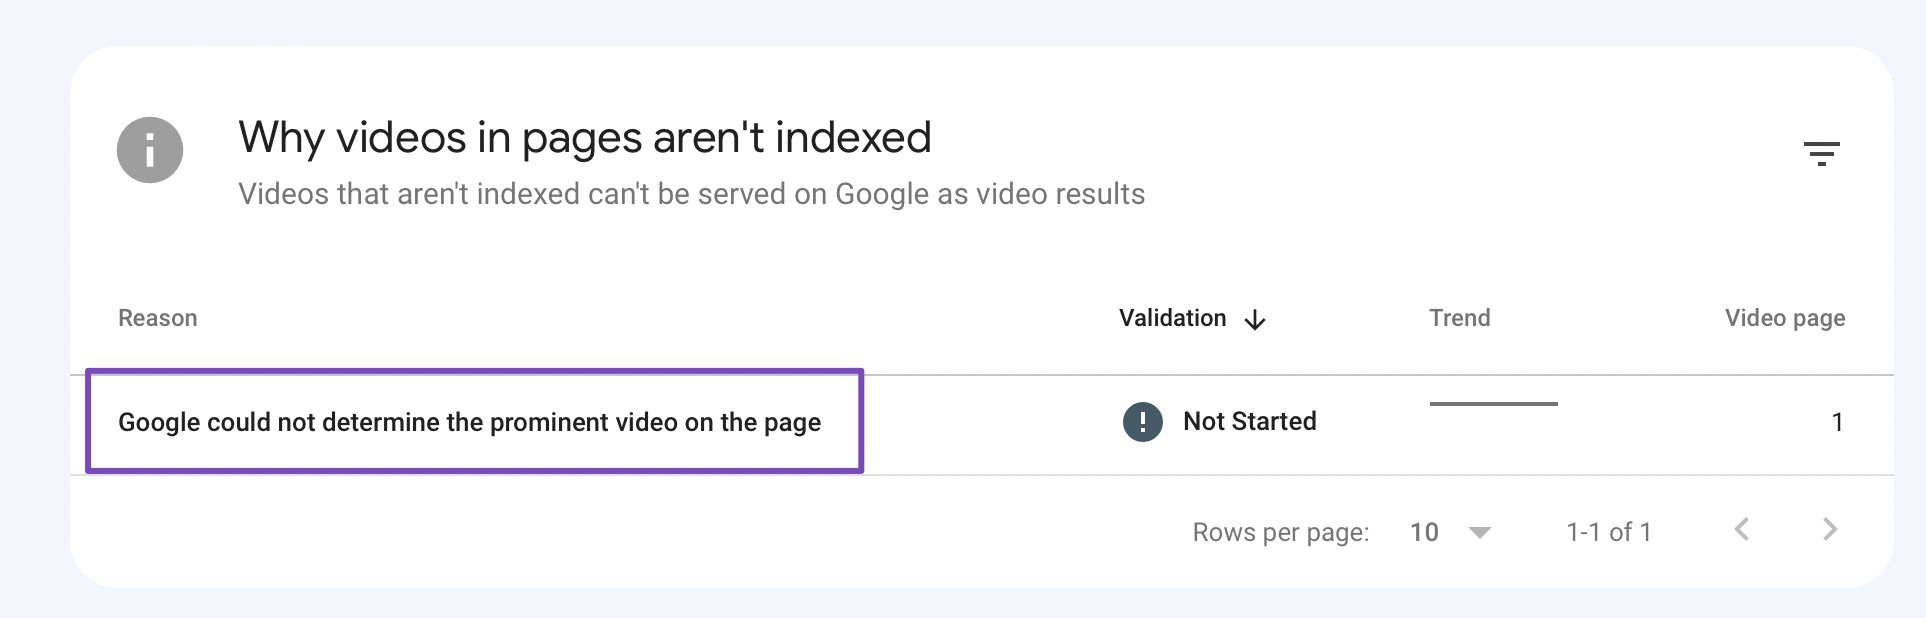 Google could not determine the prominent video on the page" error